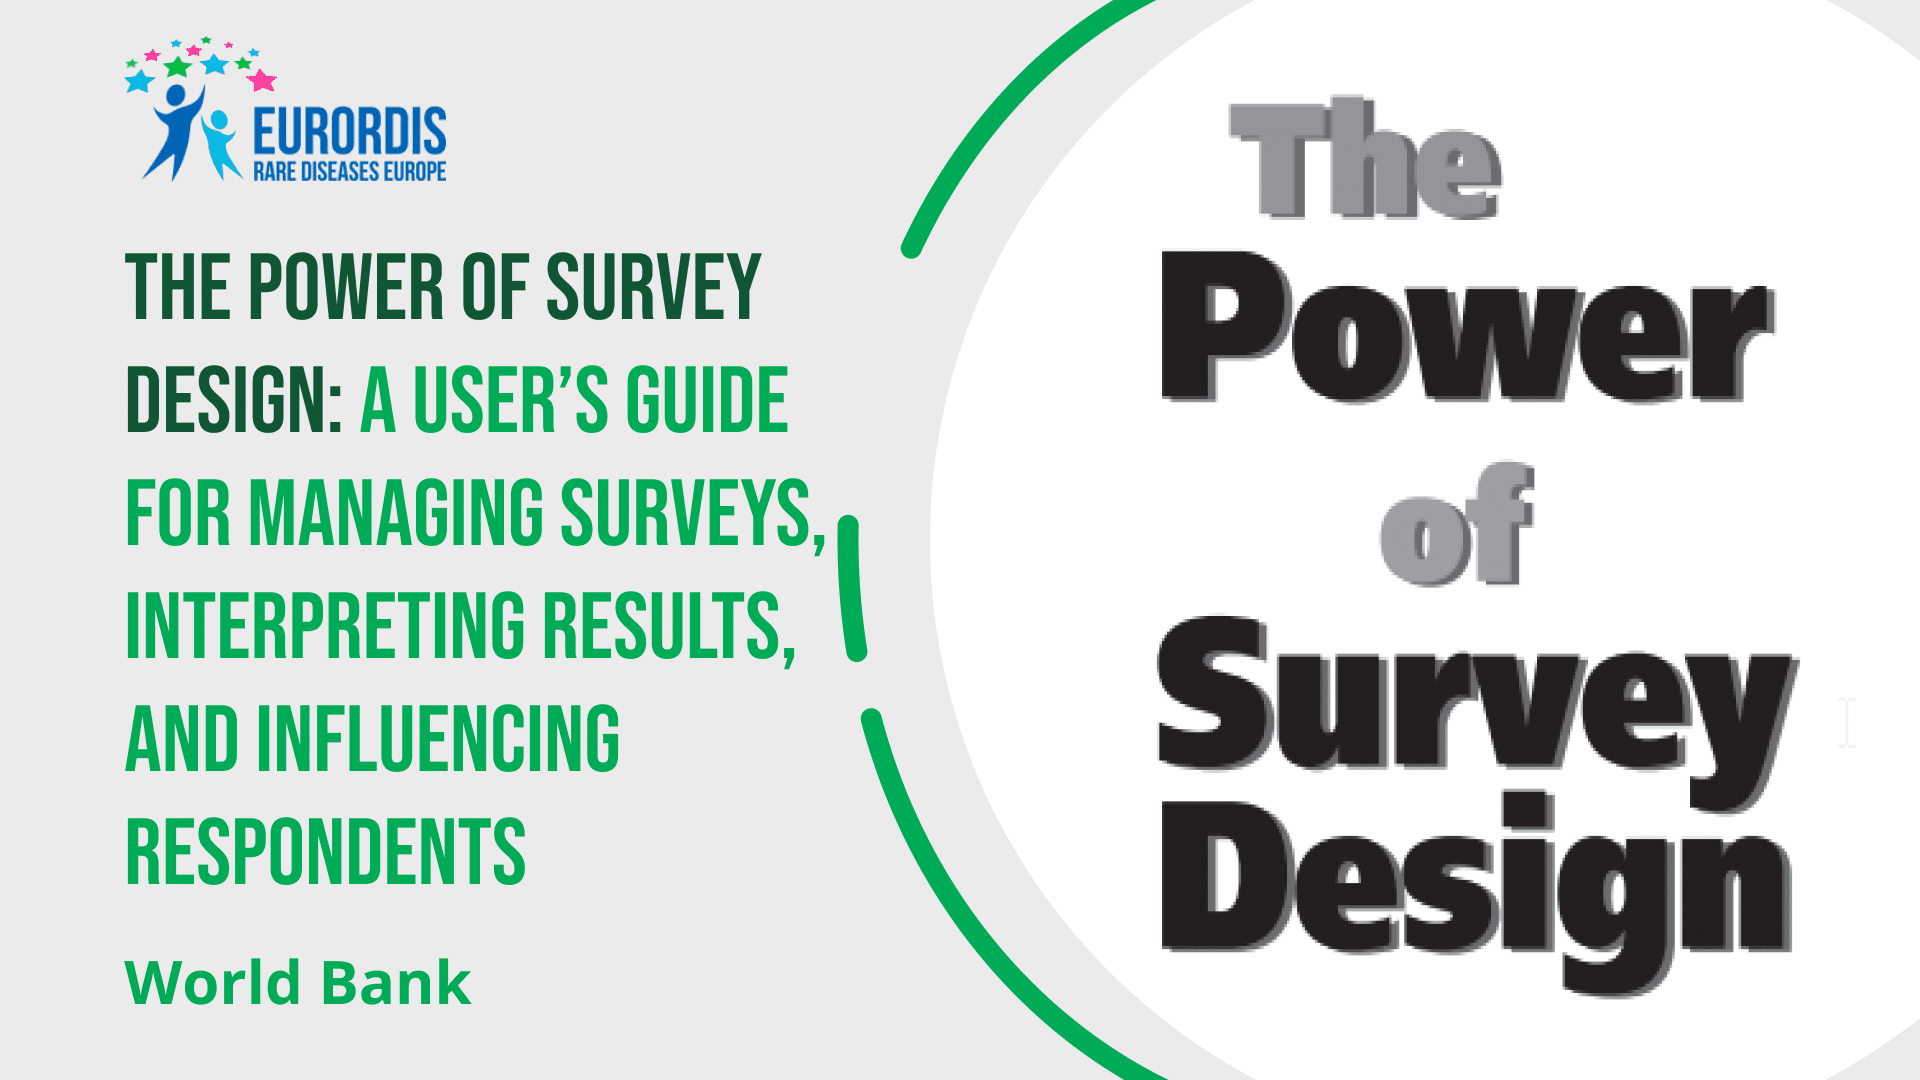 The power of survey design: A User’s Guide for Managing Surveys, Interpreting Results, and Influencing Respondents 